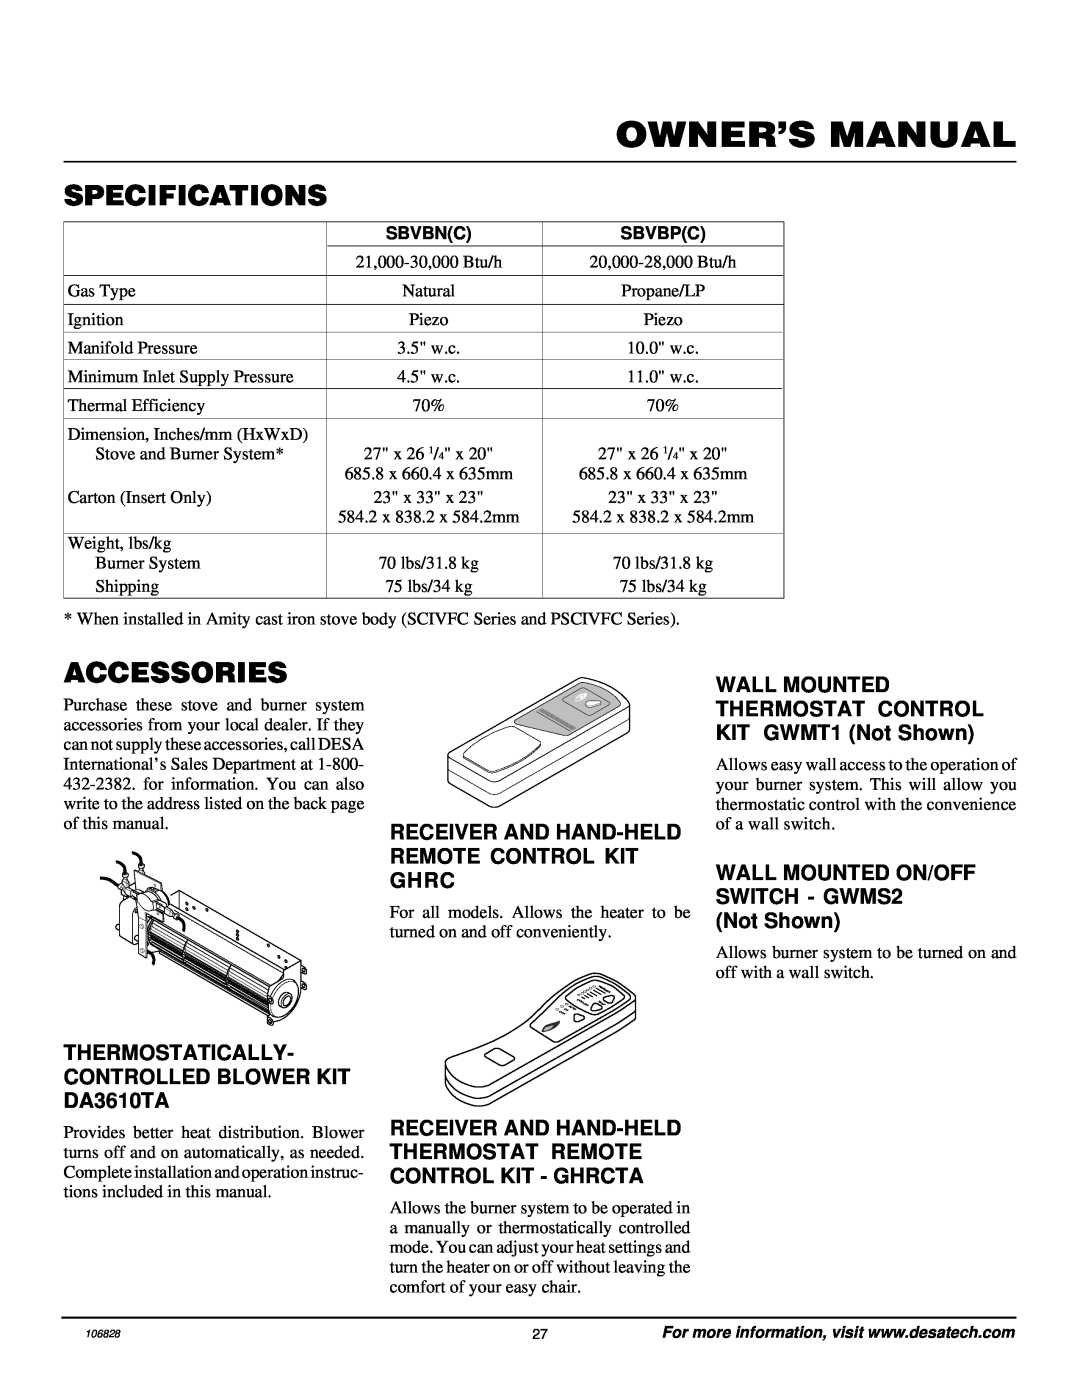 Vanguard Heating SBVBP(C) Specifications, Accessories, Receiver And Hand-Held Remote Control Kit Ghrc, Sbvbnc, Sbvbpc 